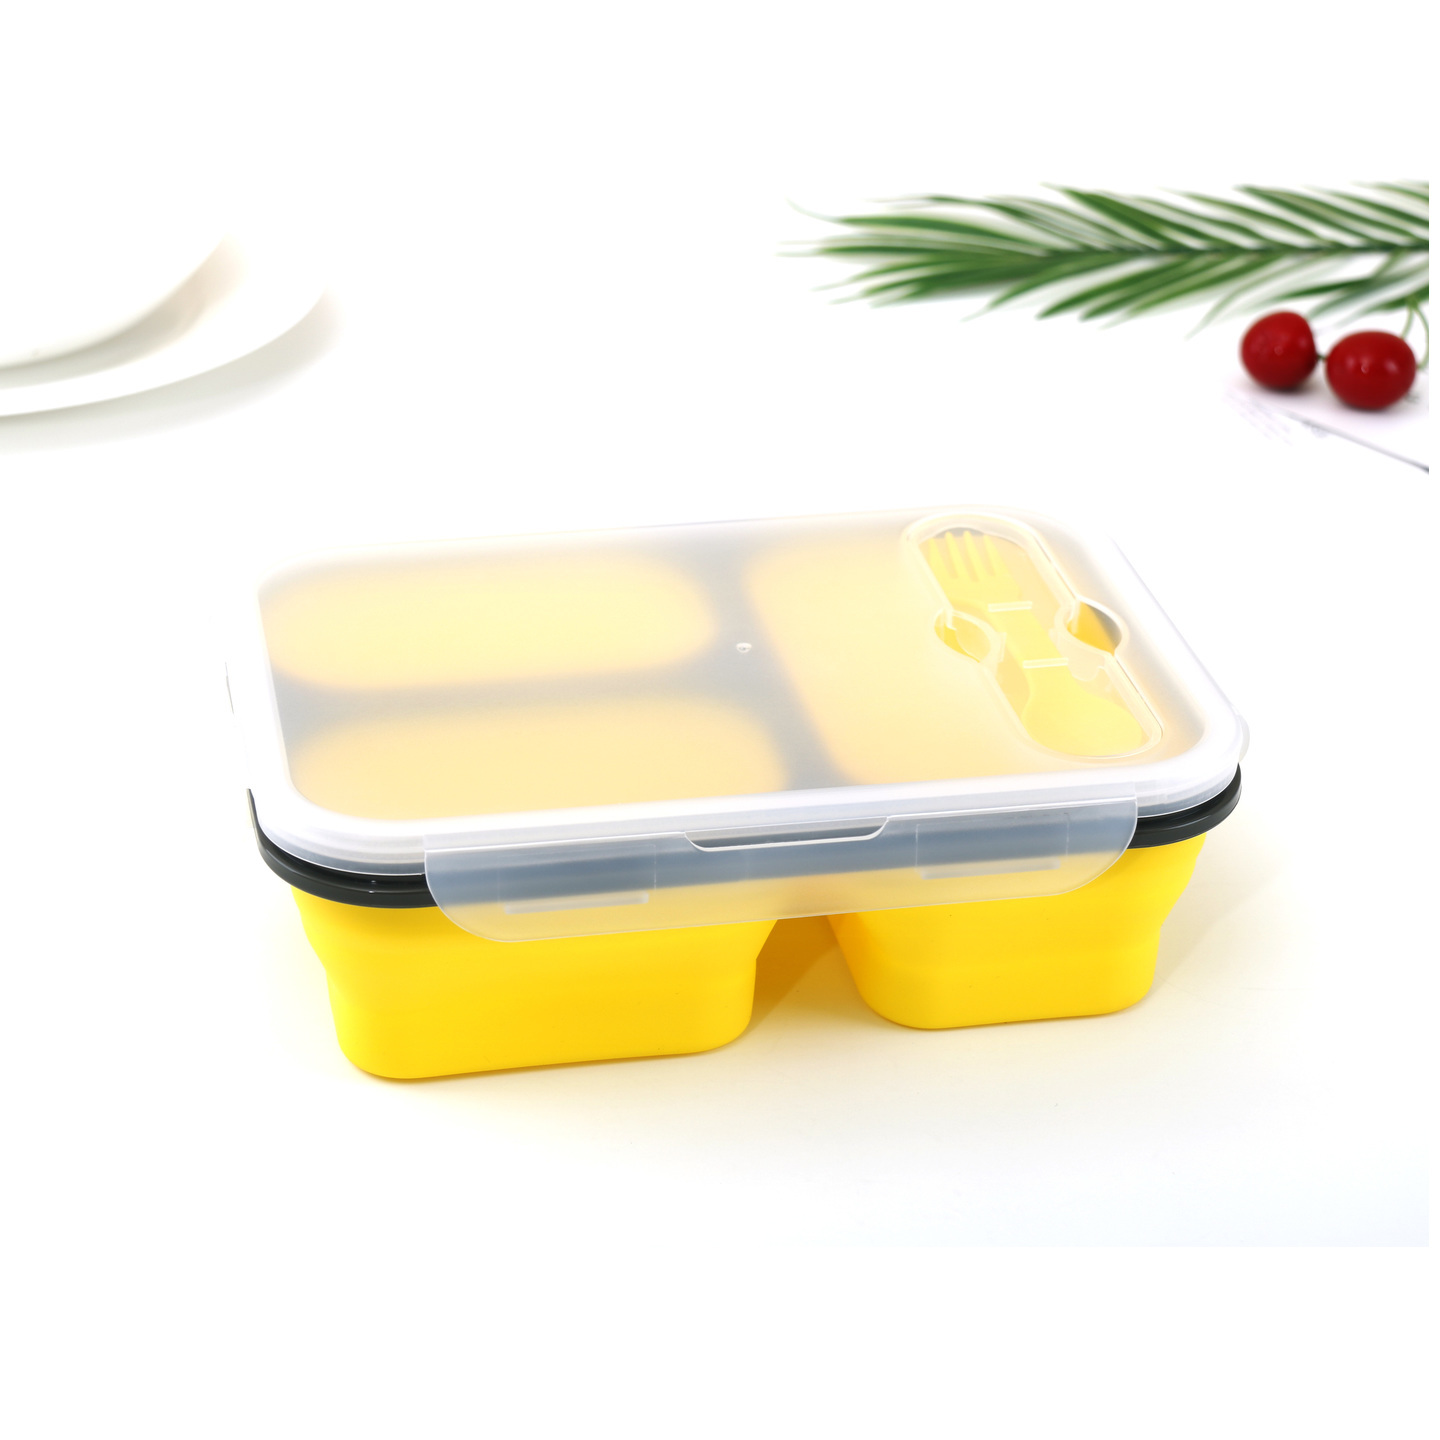 Food grade silicon collapsible lunch box with spoonforks  FDA test report cert.